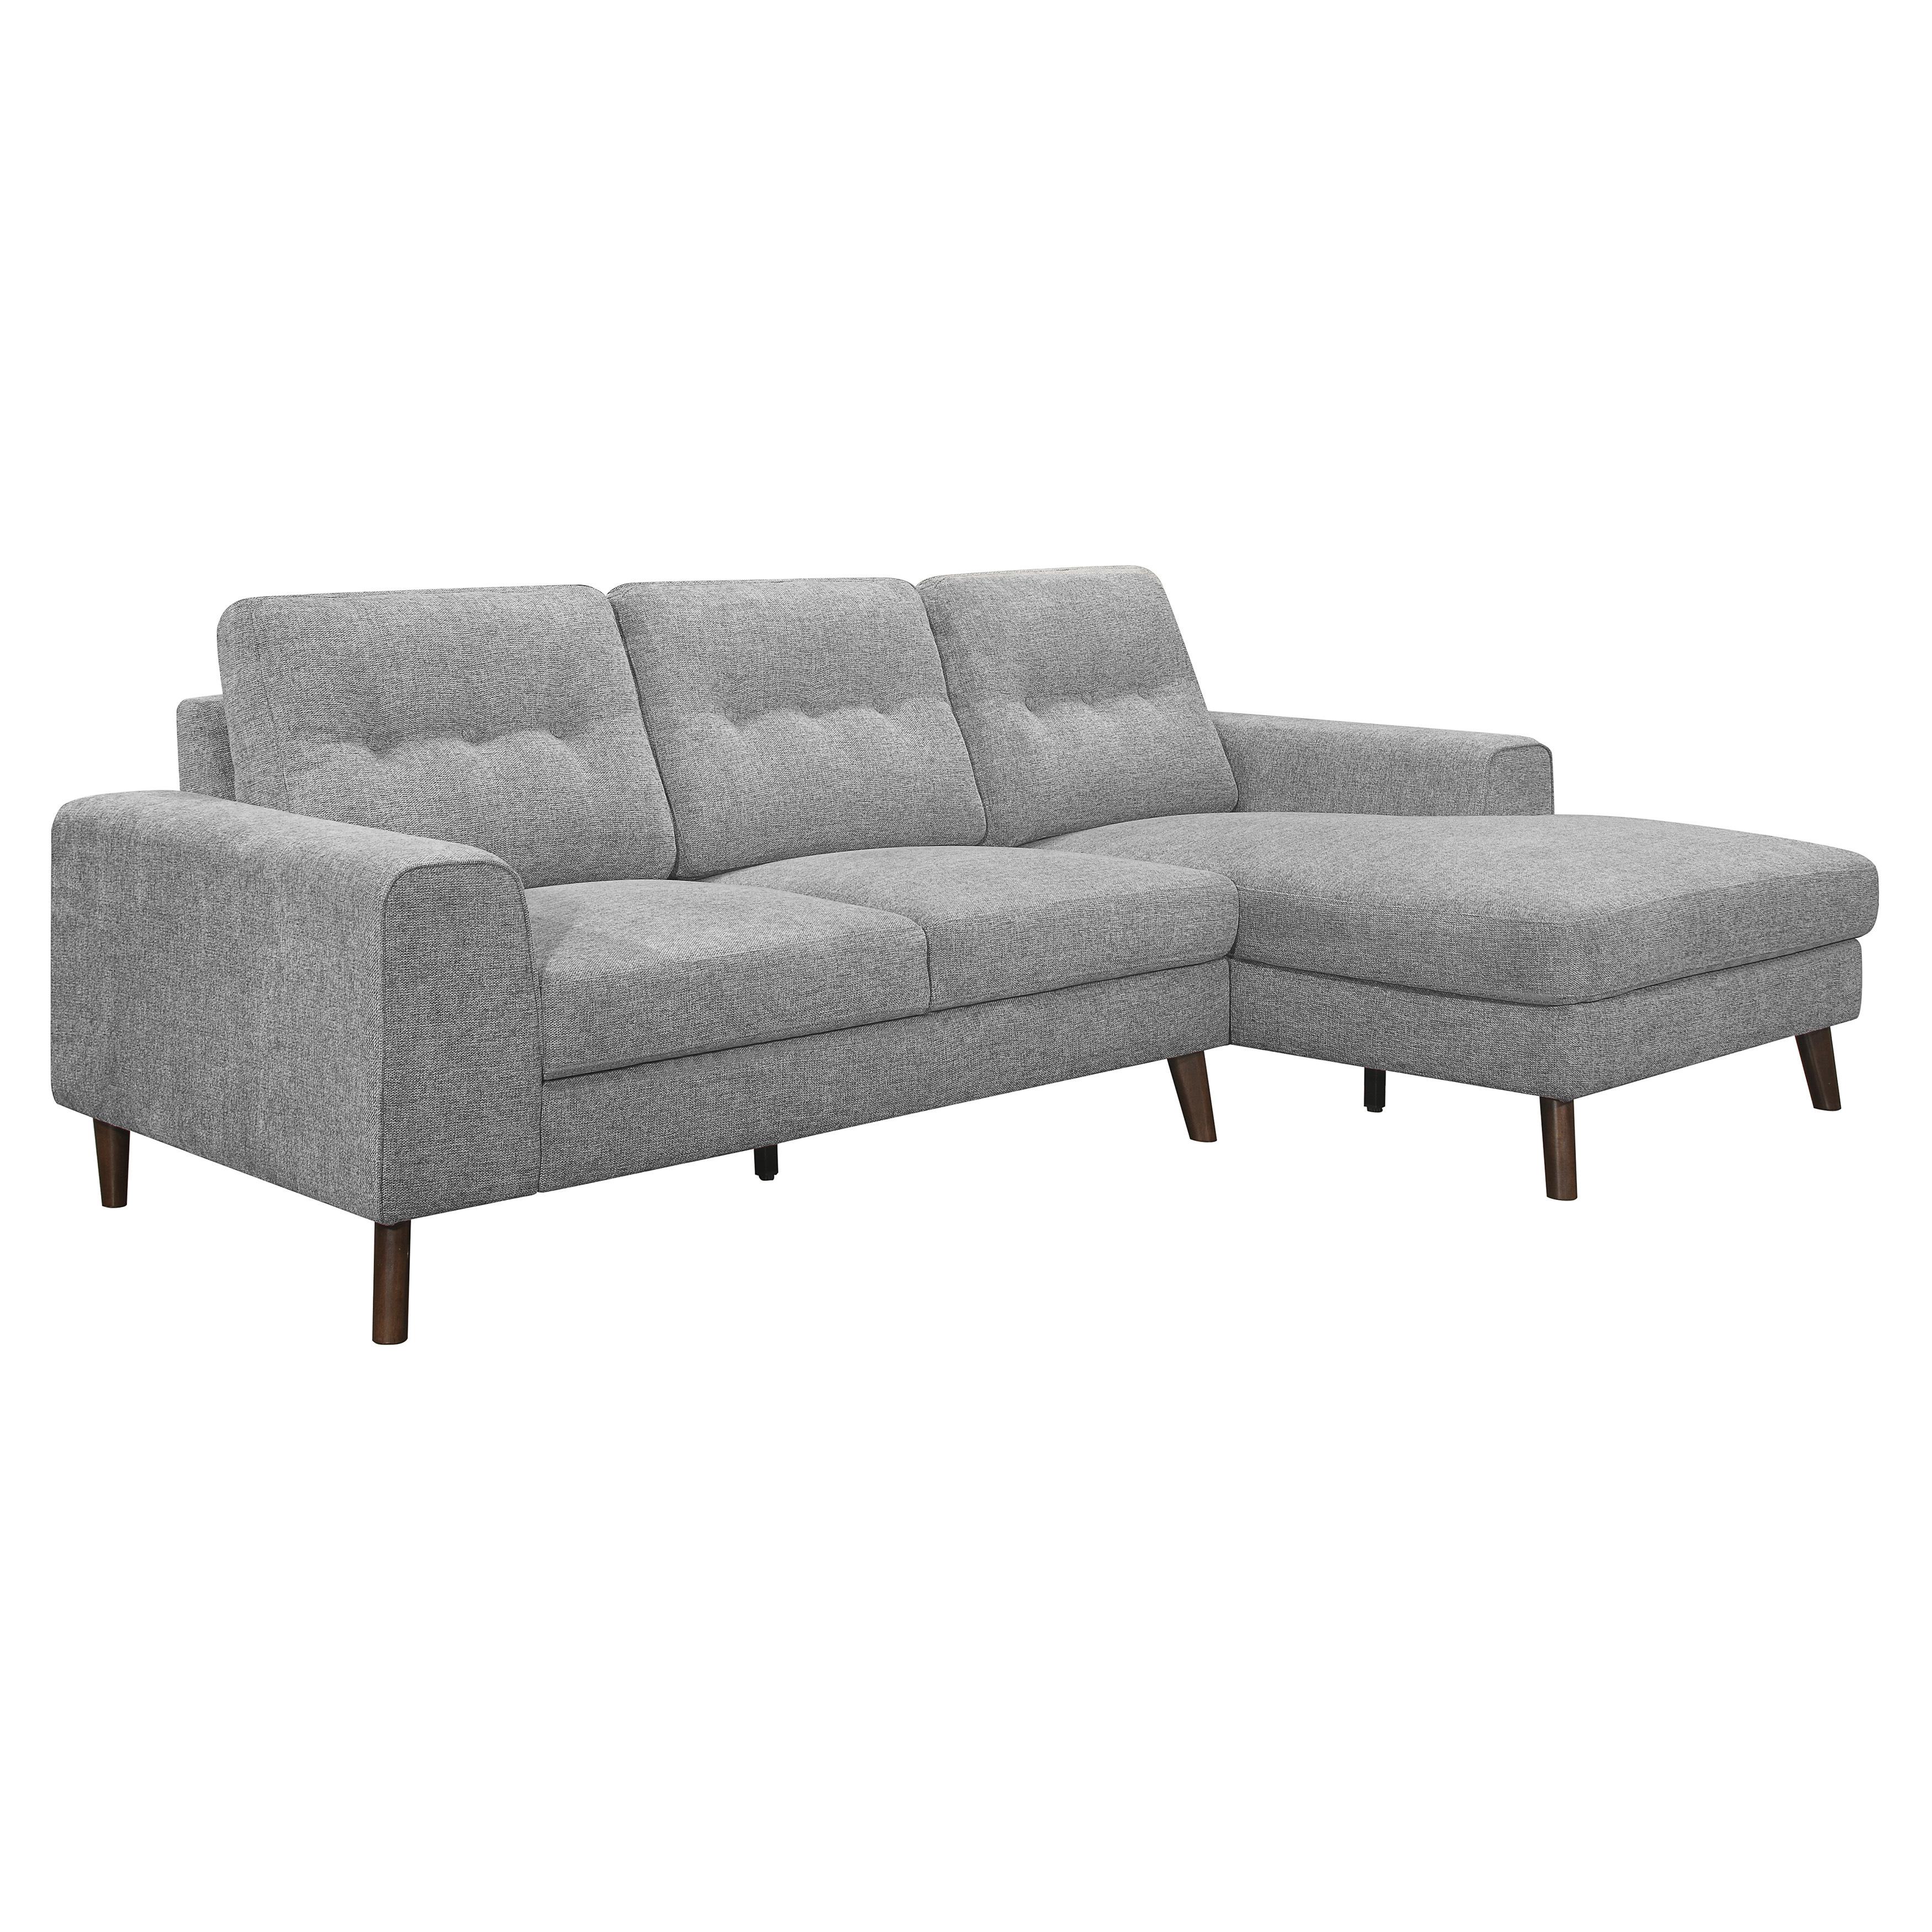 Contemporary Sectional 9300GY*SC Alexia 9300GY*SC in Gray 